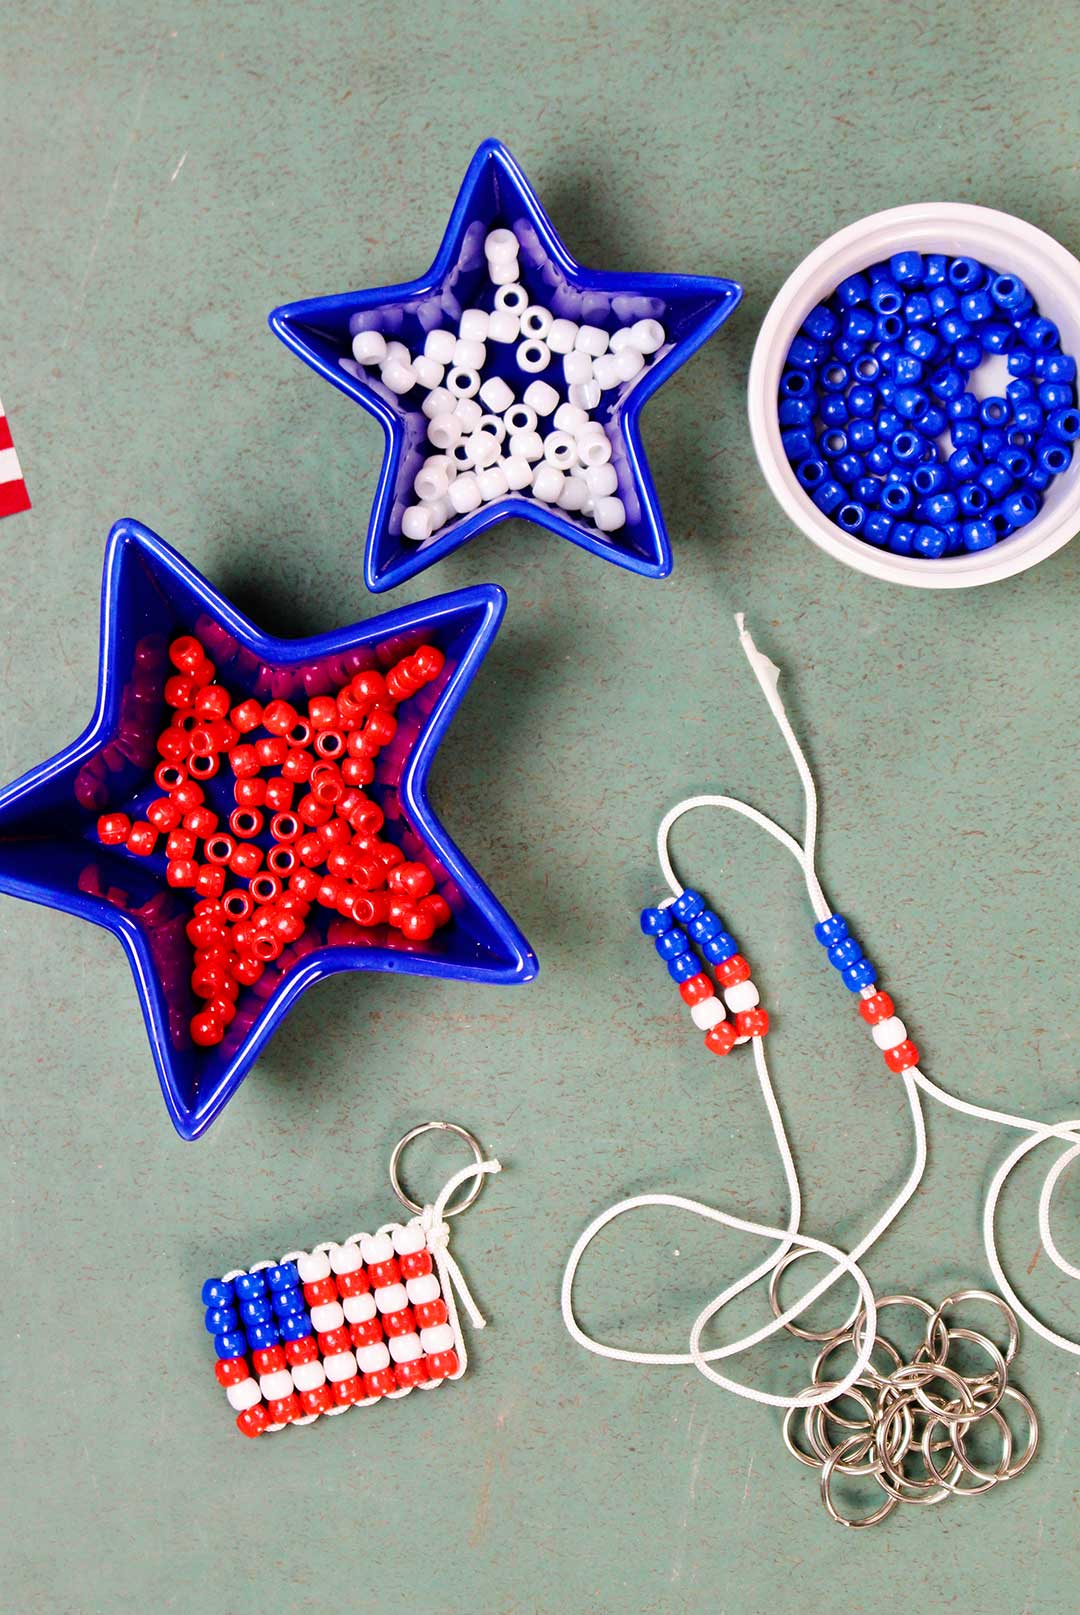 Three dishes of red, white and blue pony beads with a finished beaded flag keychain and key rings resting on a green counter. White string with beads showing step 3.